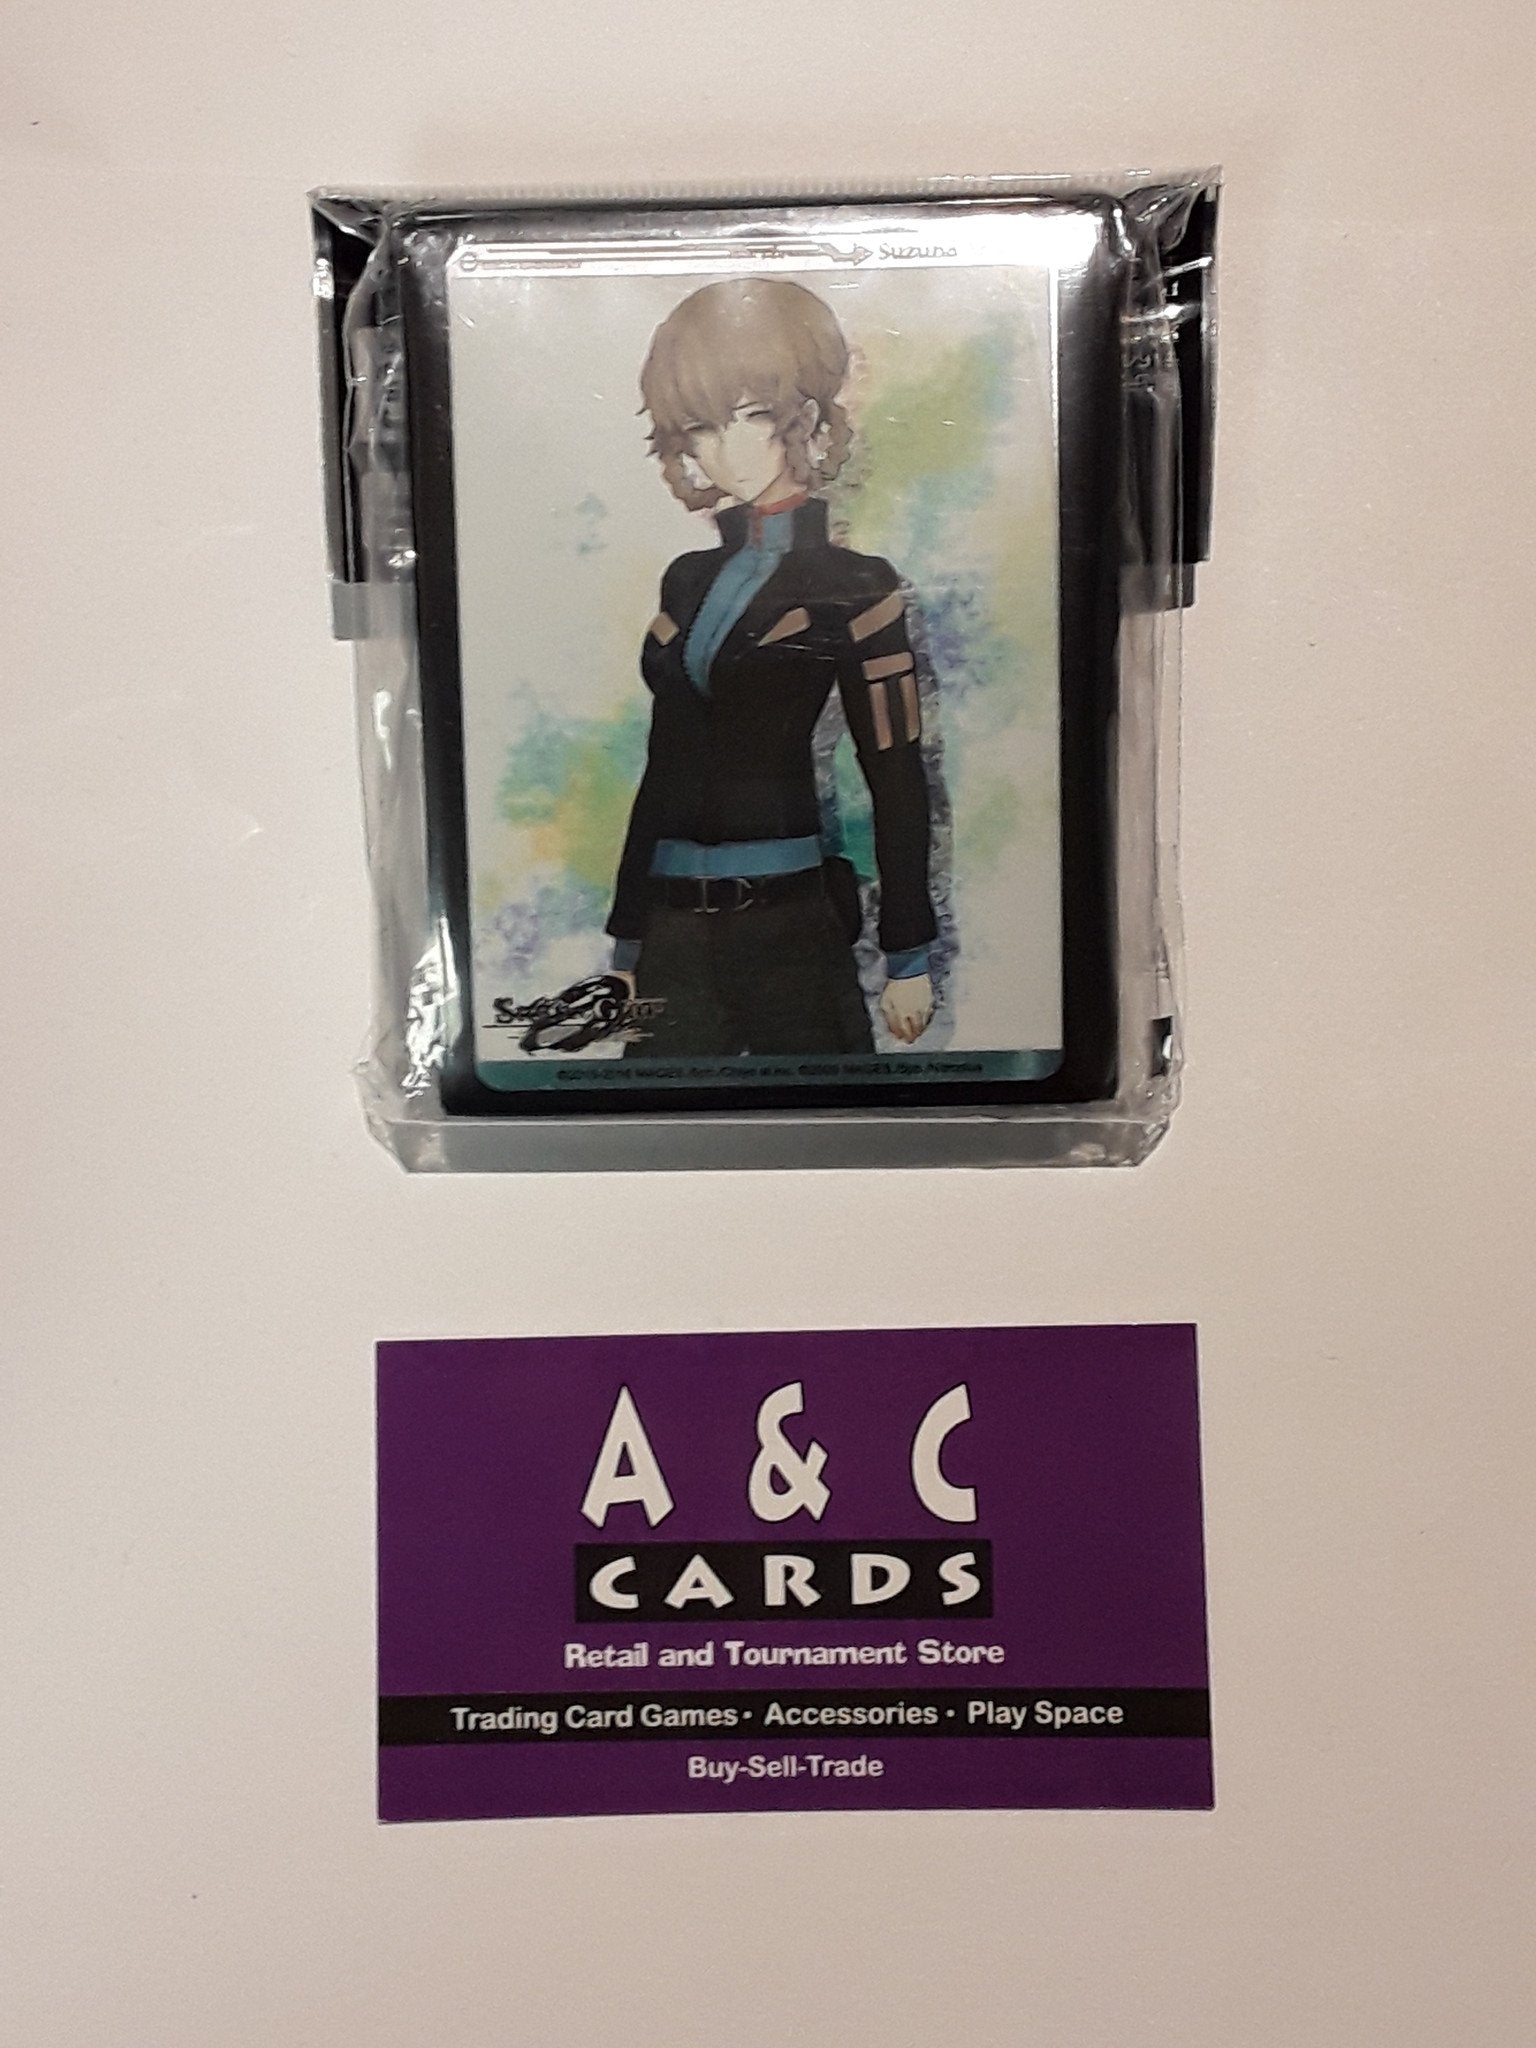 Character Sleeves "Amane Suzcha" #1 - 1 pack of Standard Size Sleeves 60pc. - Steins;gate